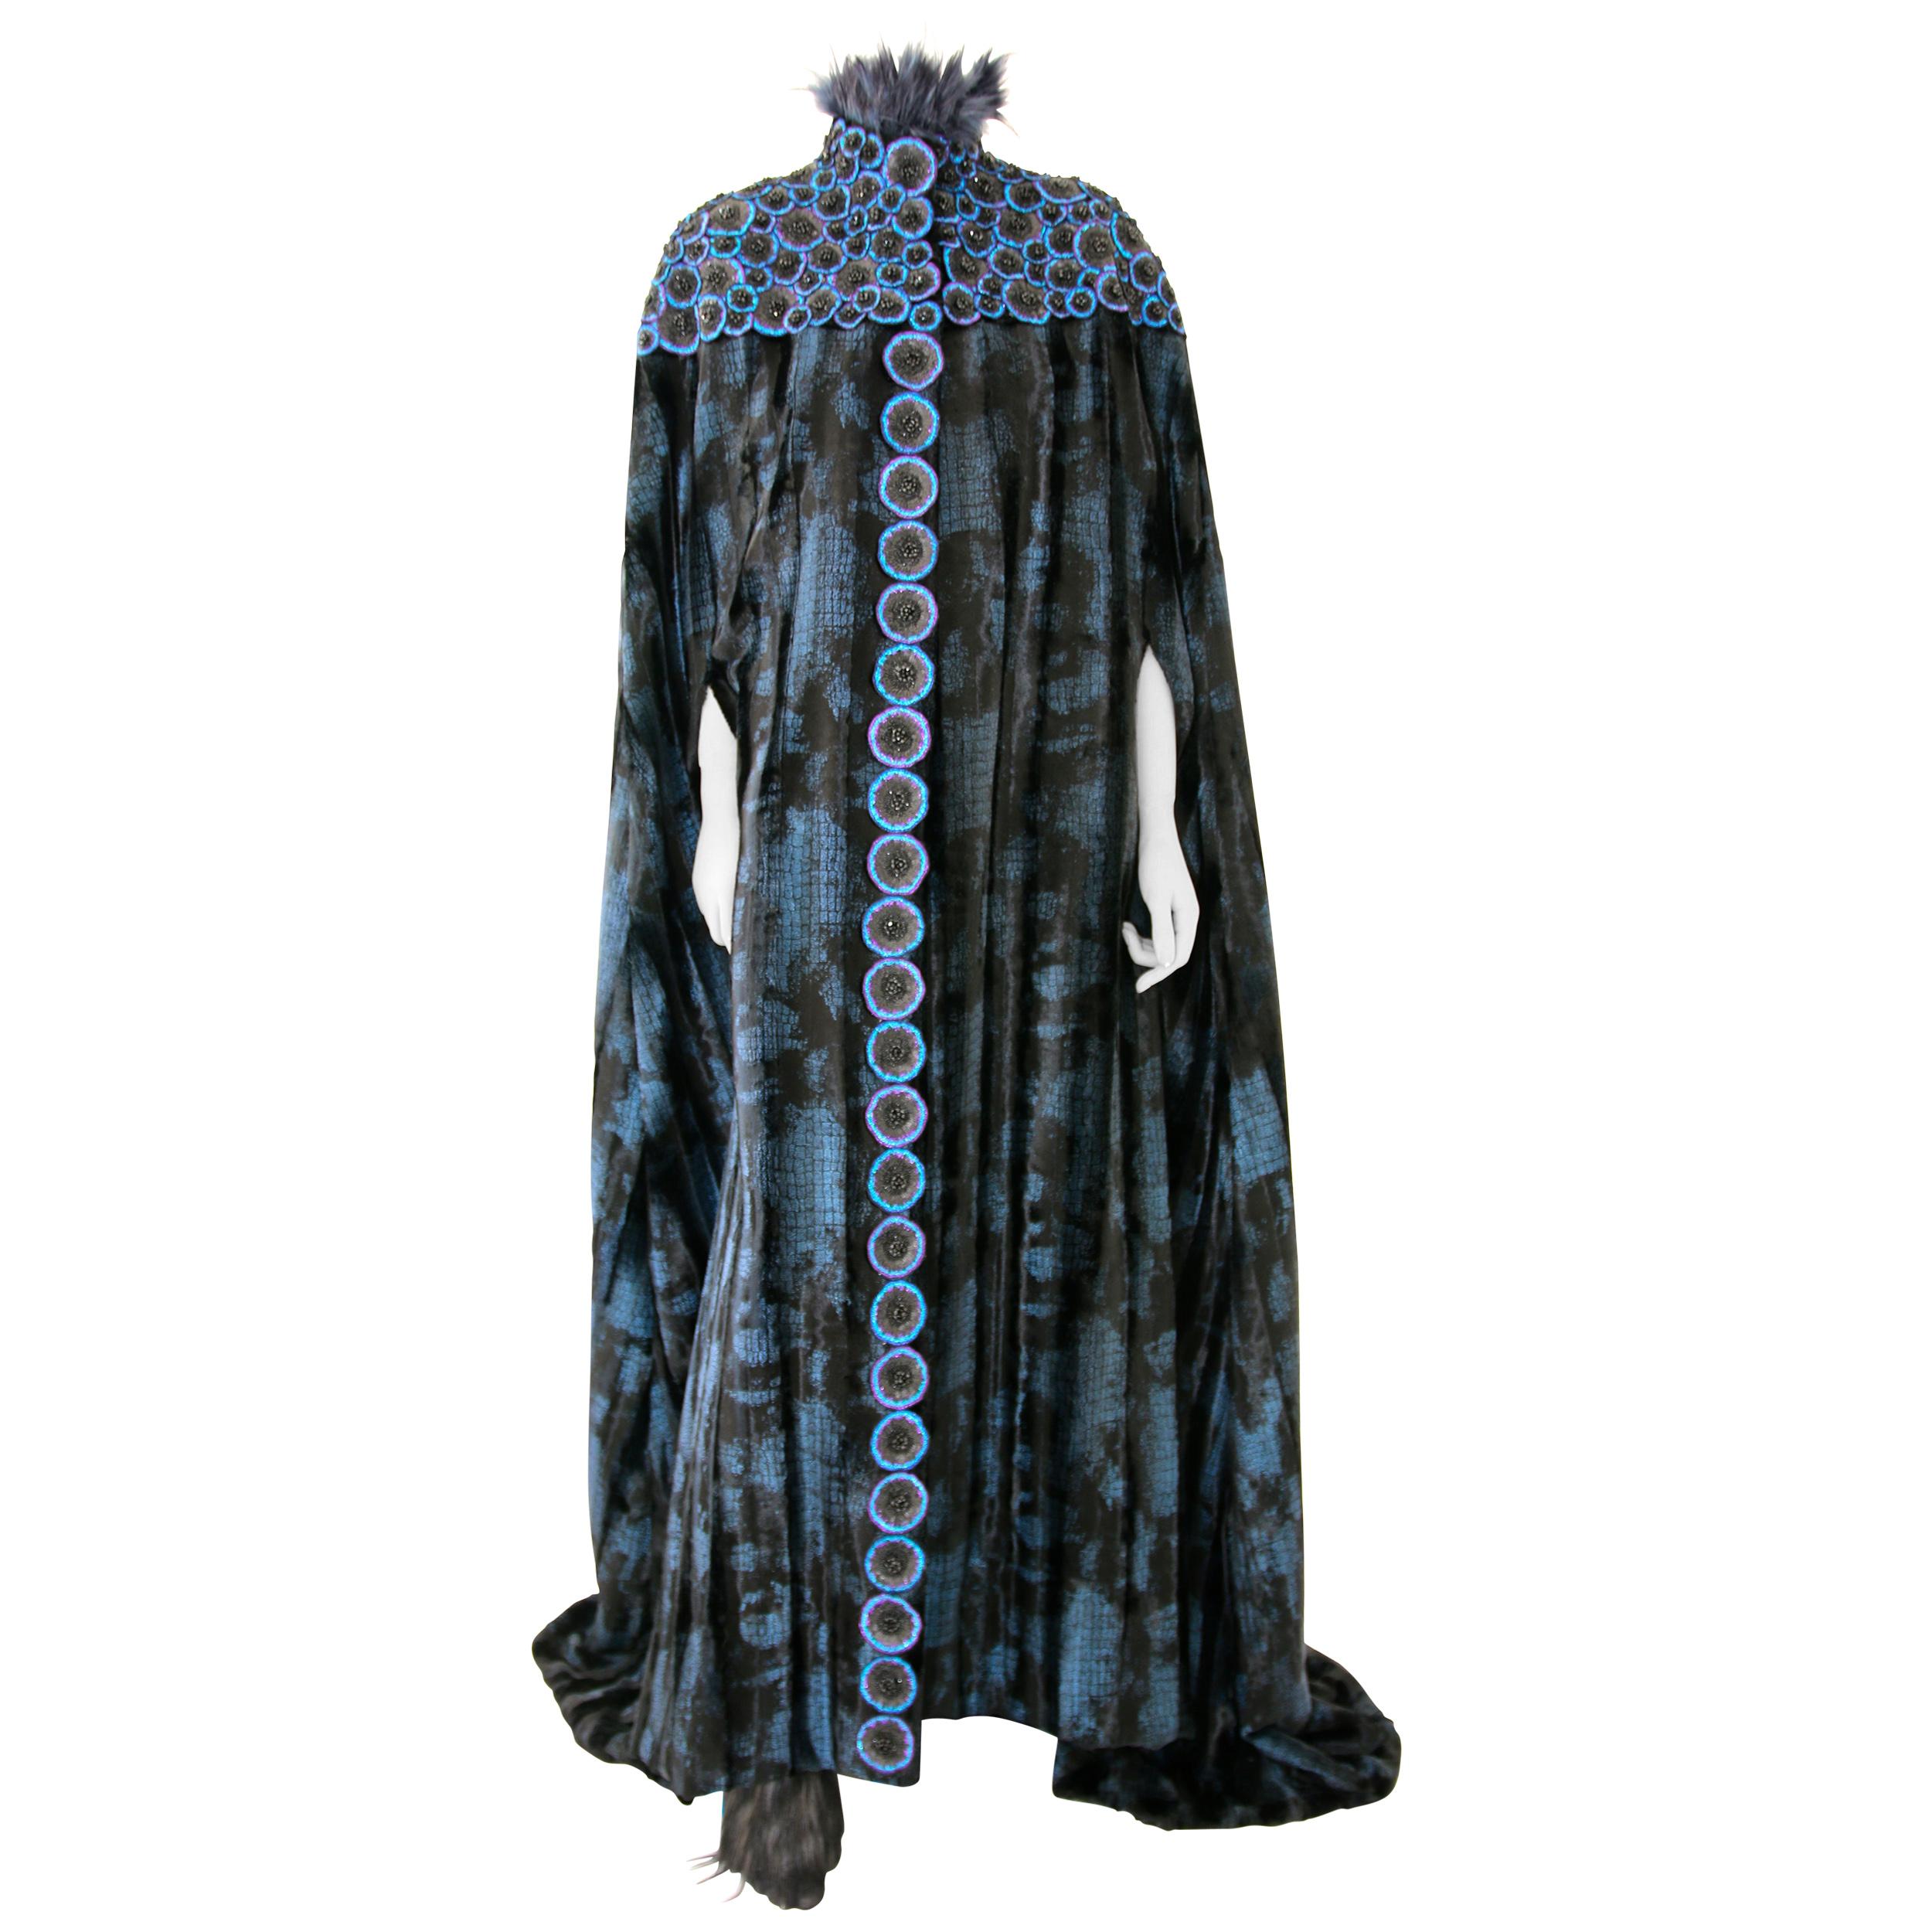 Pelush Black and Blue Faux Fur Couture Opera Coat Cape with Embroidery - Small